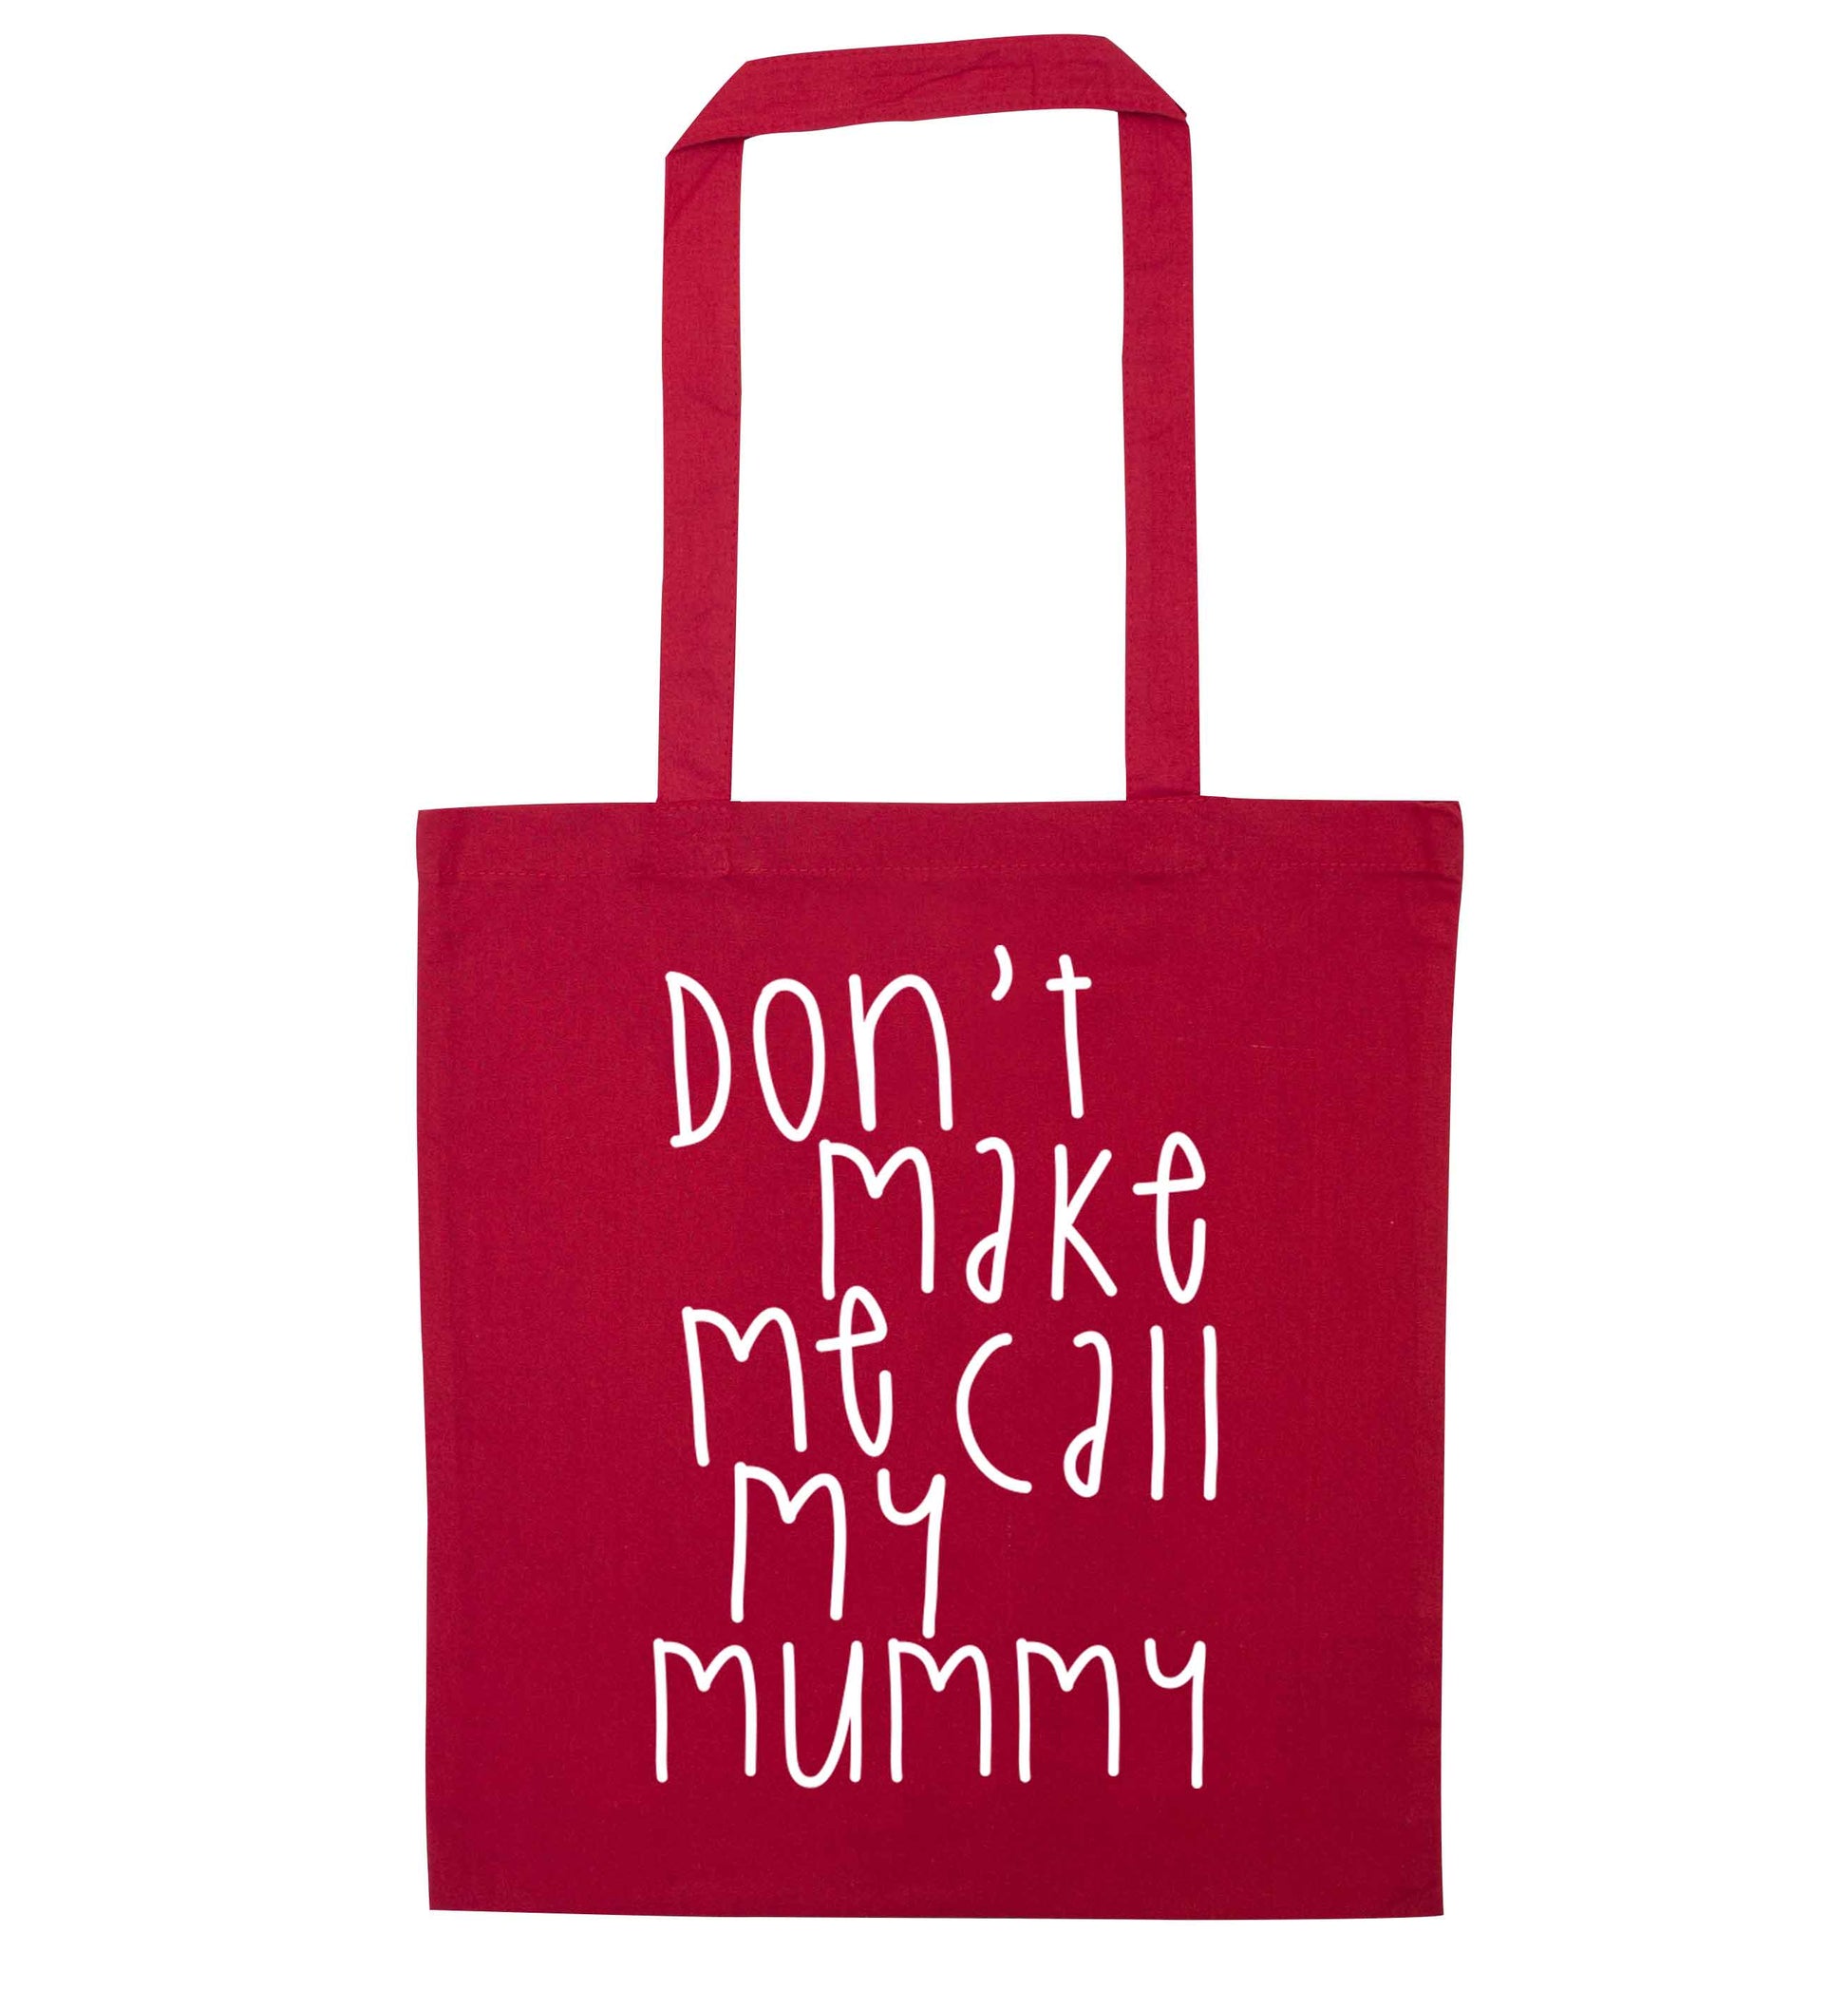 Don't make me call my mummy red tote bag